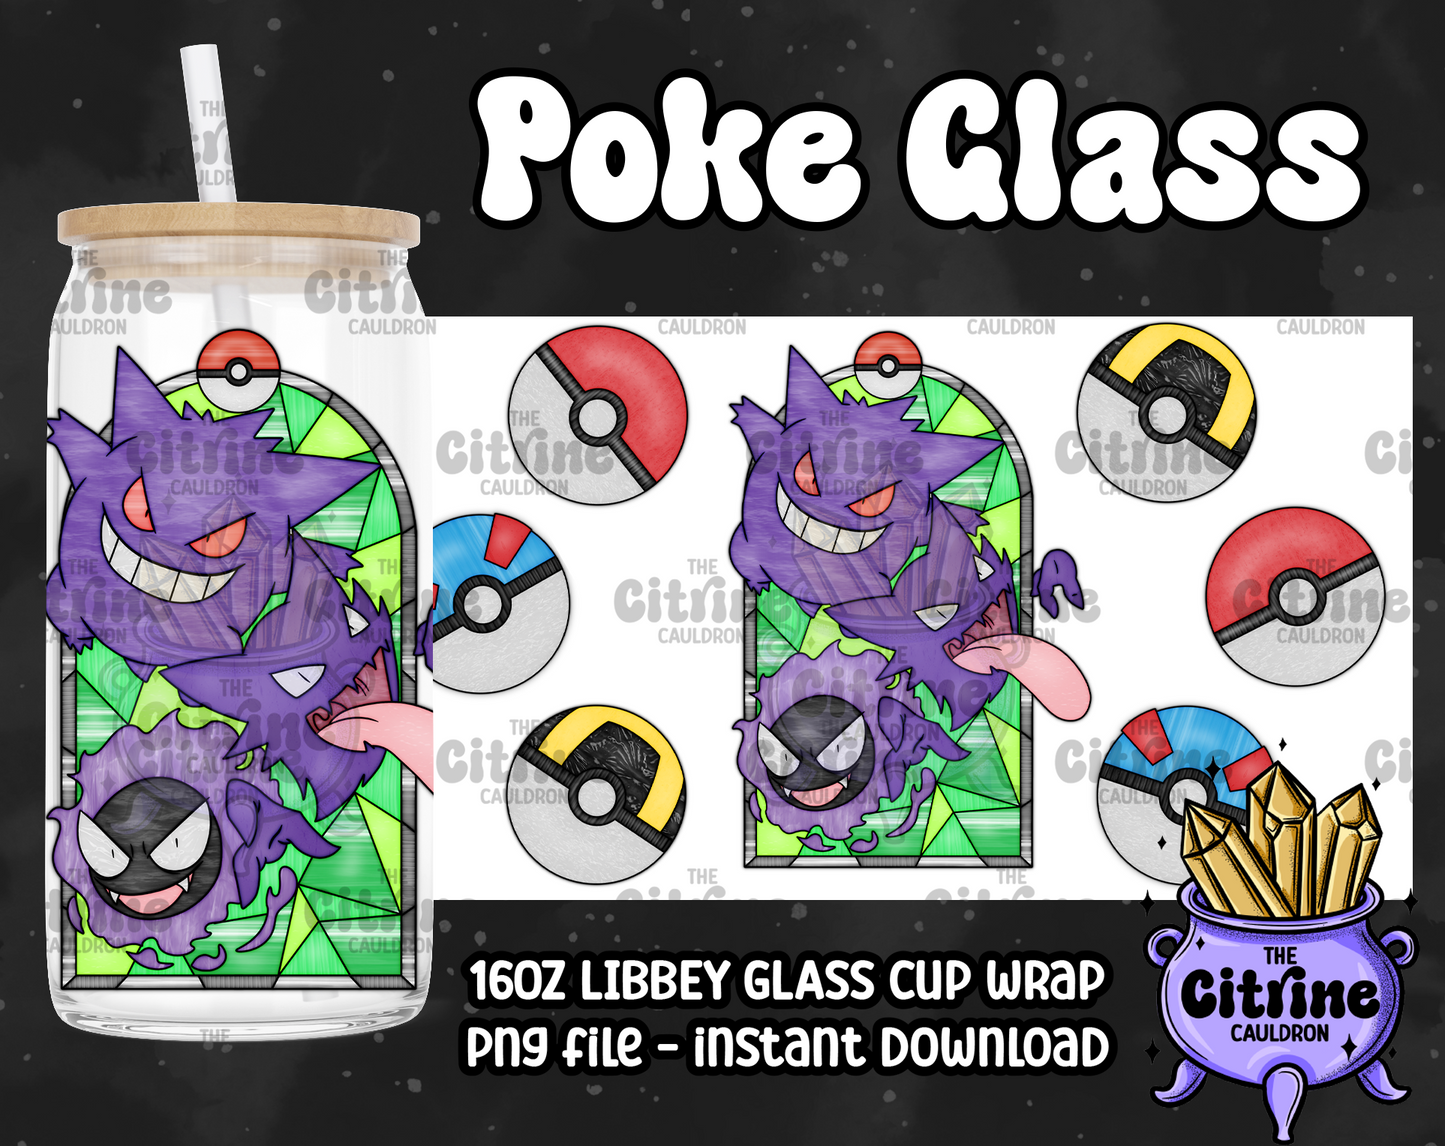 Poke Glass Volume 2 - PNG Wrap for Libbey 16oz Glass Can